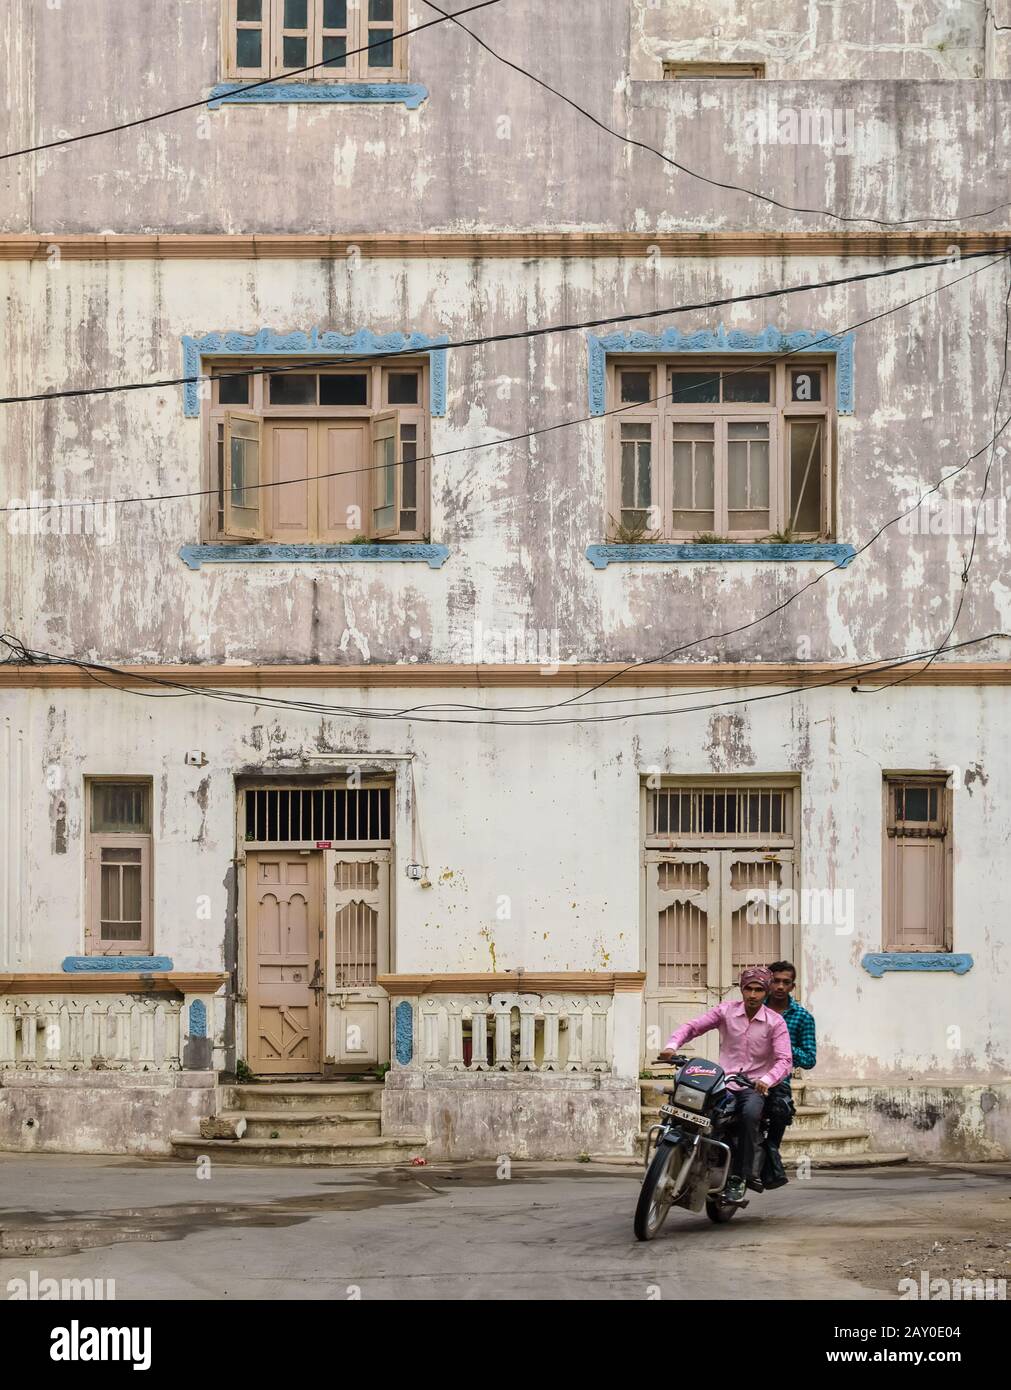 Diu, India - December 2018: Two men bike down a road past an old weathered residential building with quaint windows and wooden doors. Stock Photo